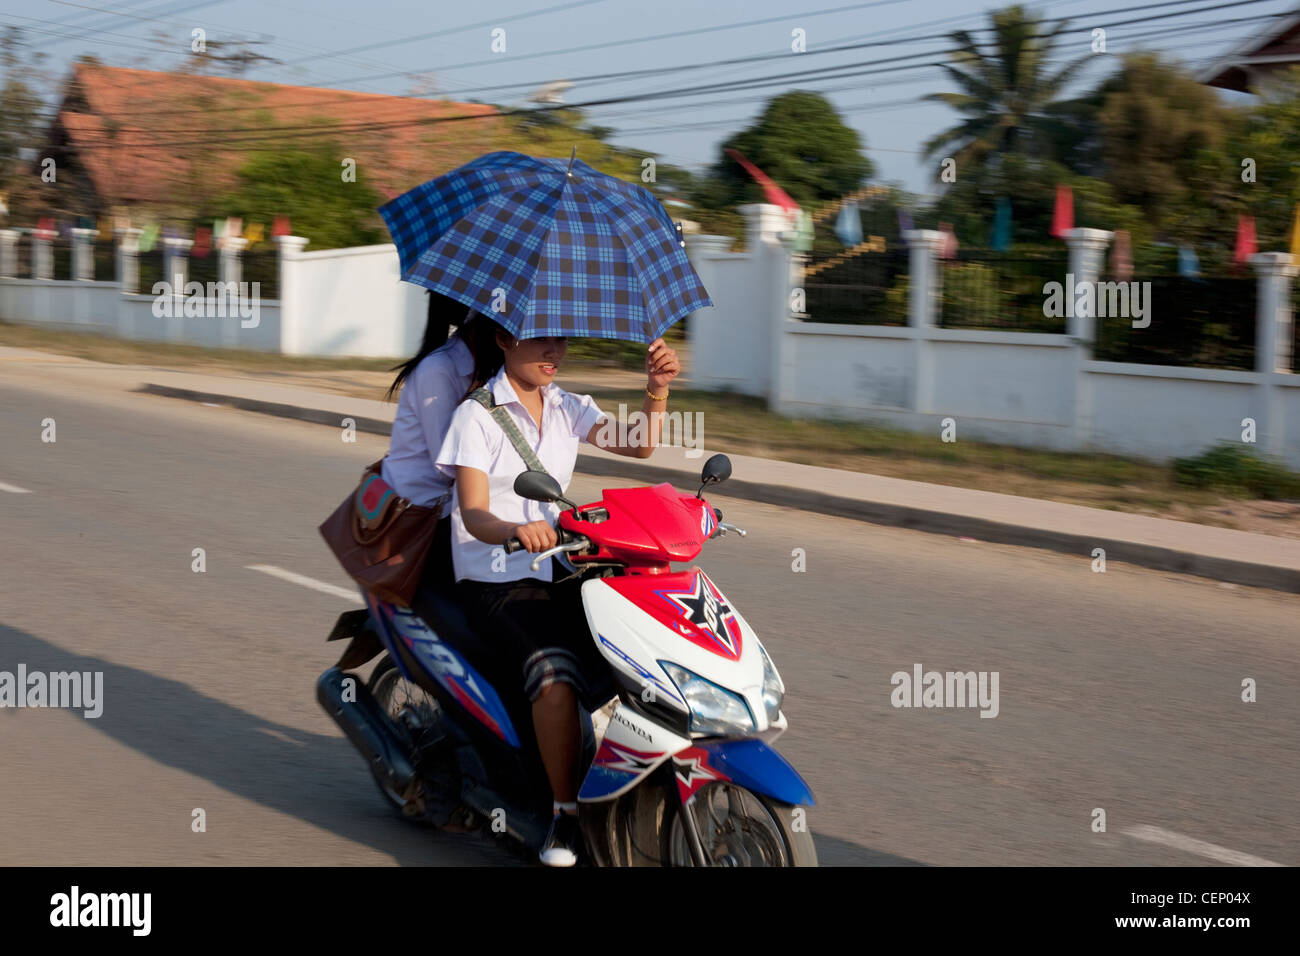 Parasol On A Bike High Resolution Stock Photography and Images - Alamy